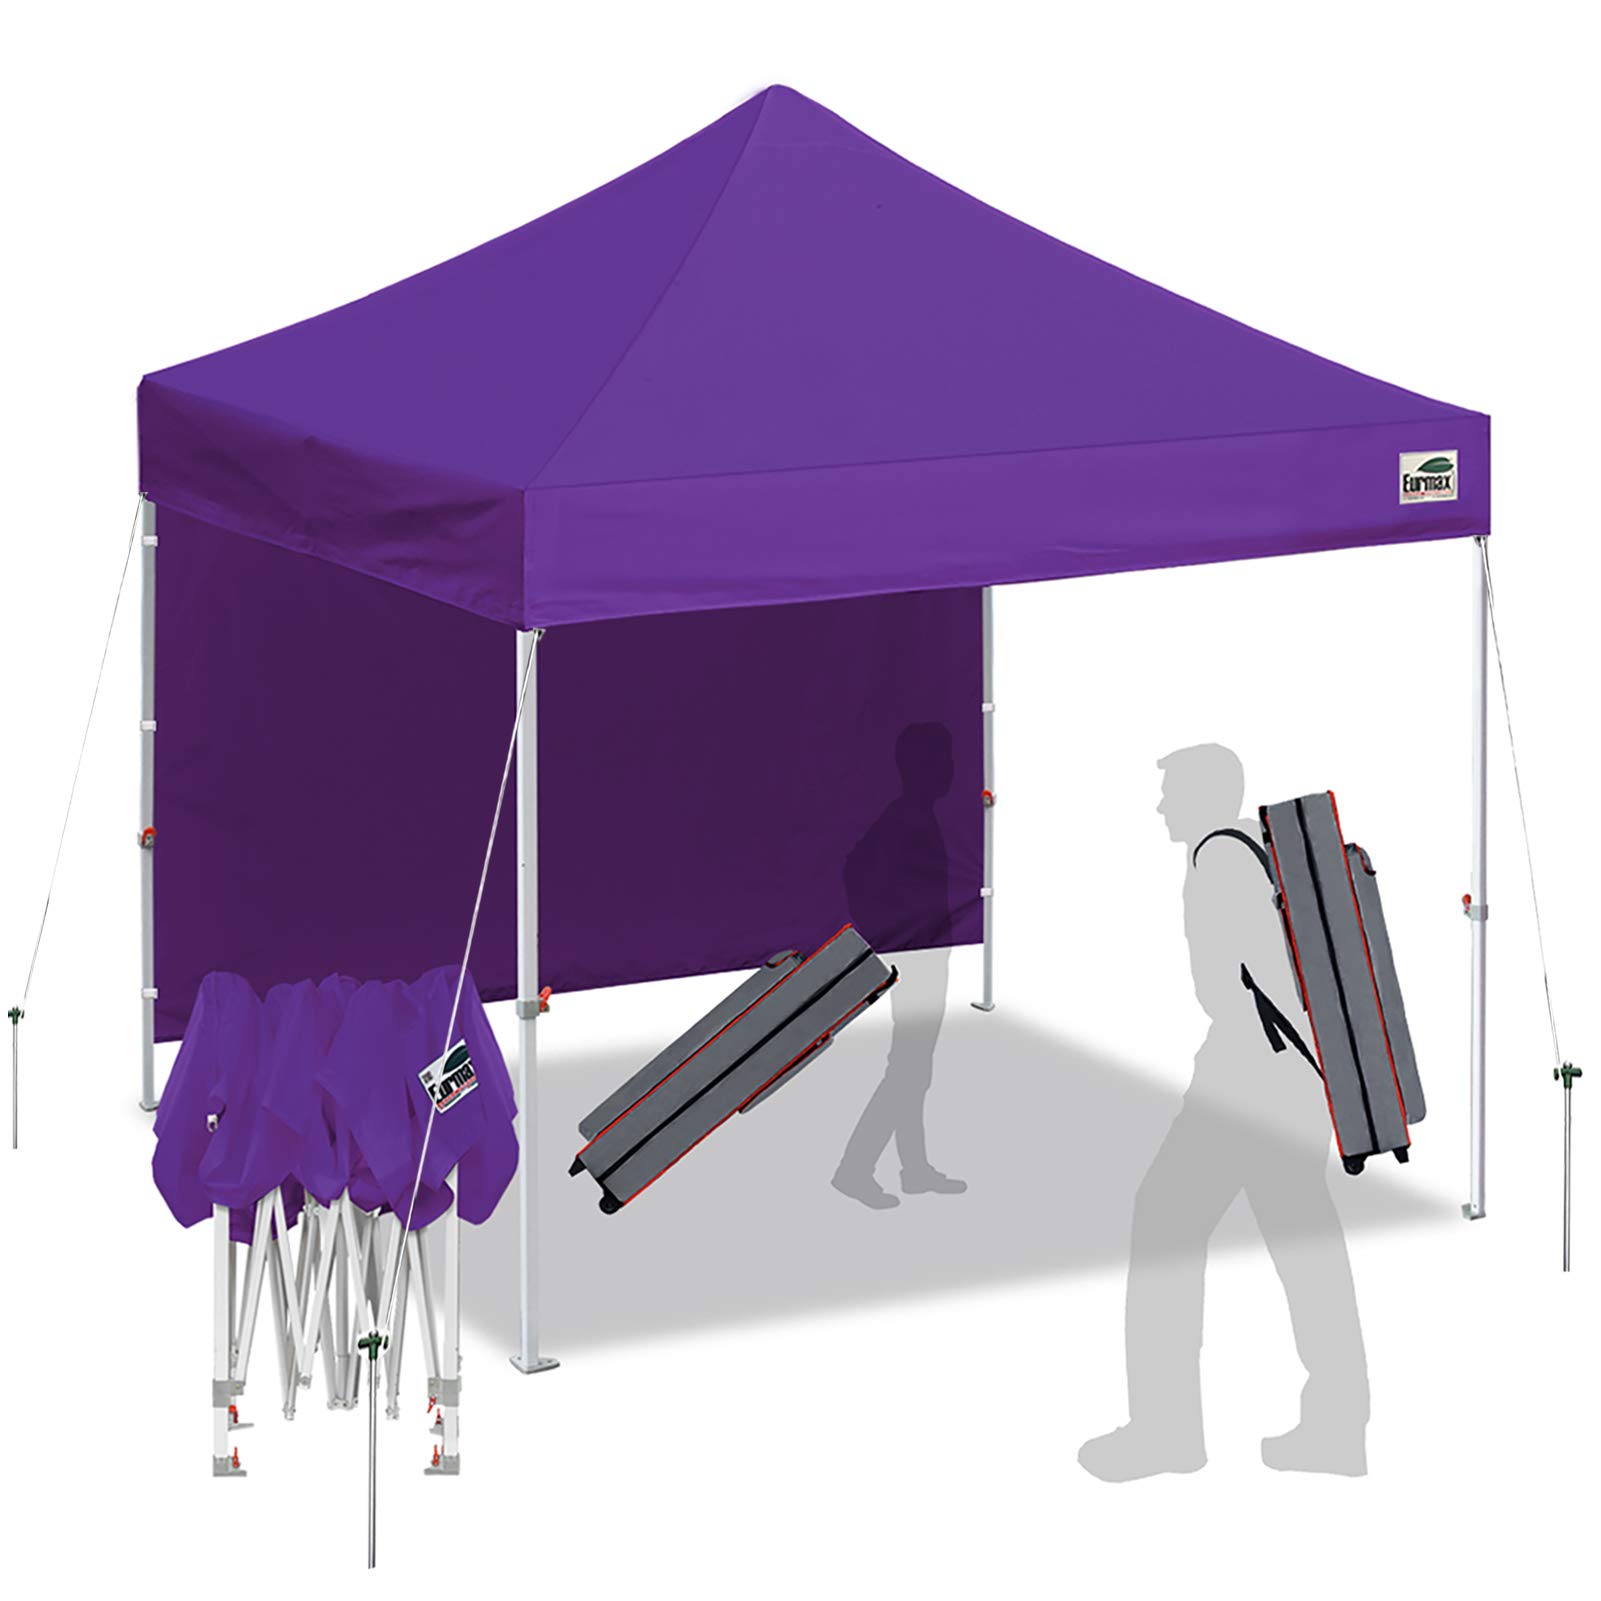 Eurmax Smart 10'x10' Pop up Canopy Tent Outdoor Festival Tailgate Event Vendor Craft Show Canopy Instant Shelter with 1 Removable Sunwall and Backpack Roller Bag Bonus 4X Stakes - image 1 of 3